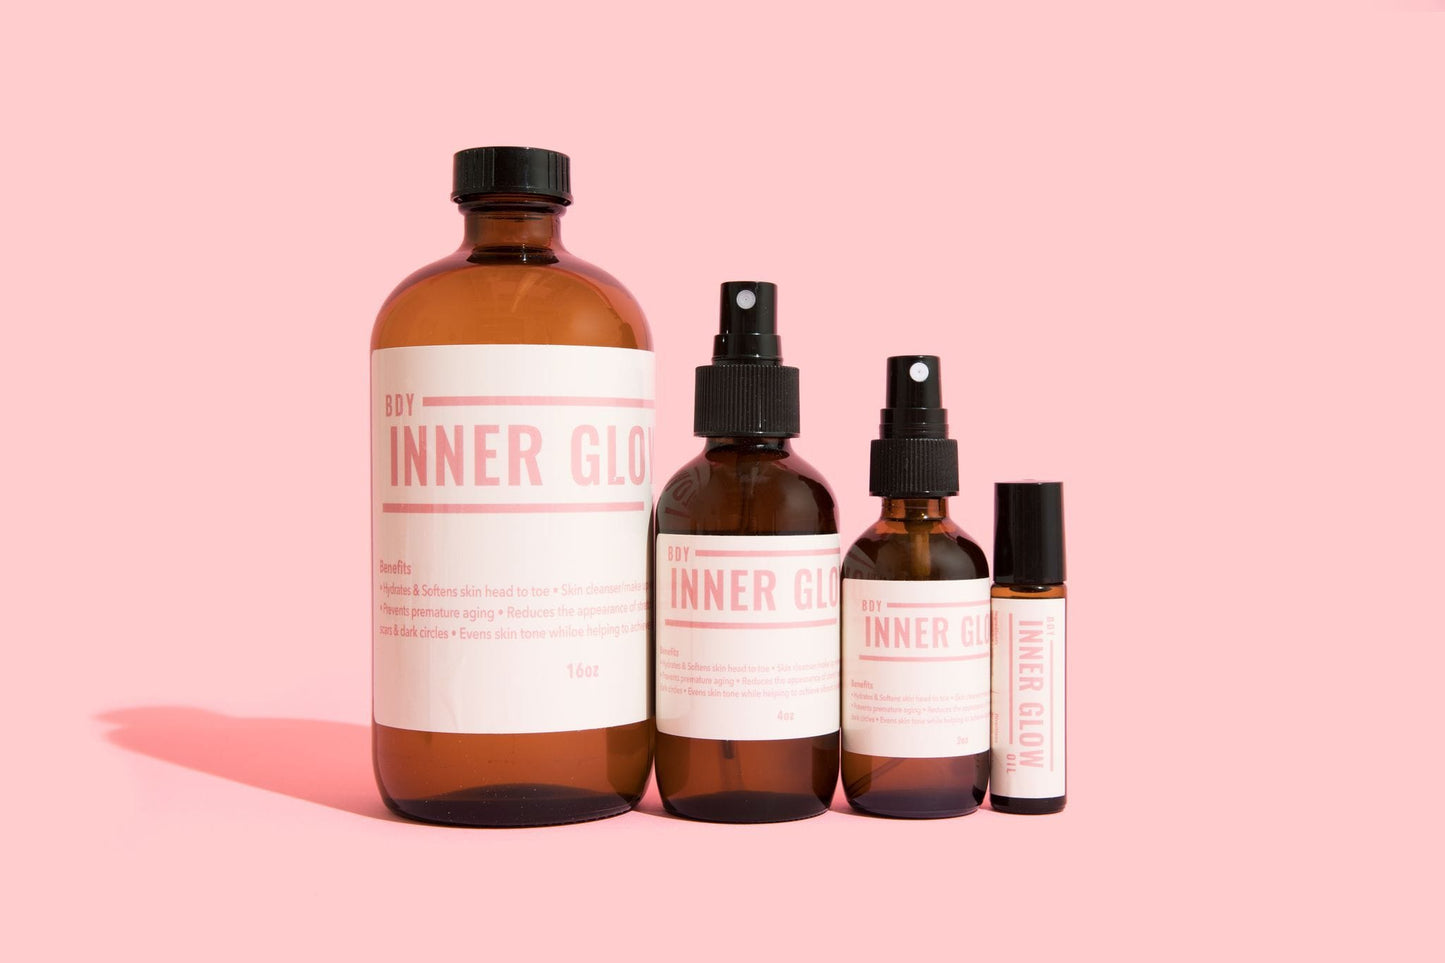 Inner Glow Life Signature BDY Oil - Family Pack.